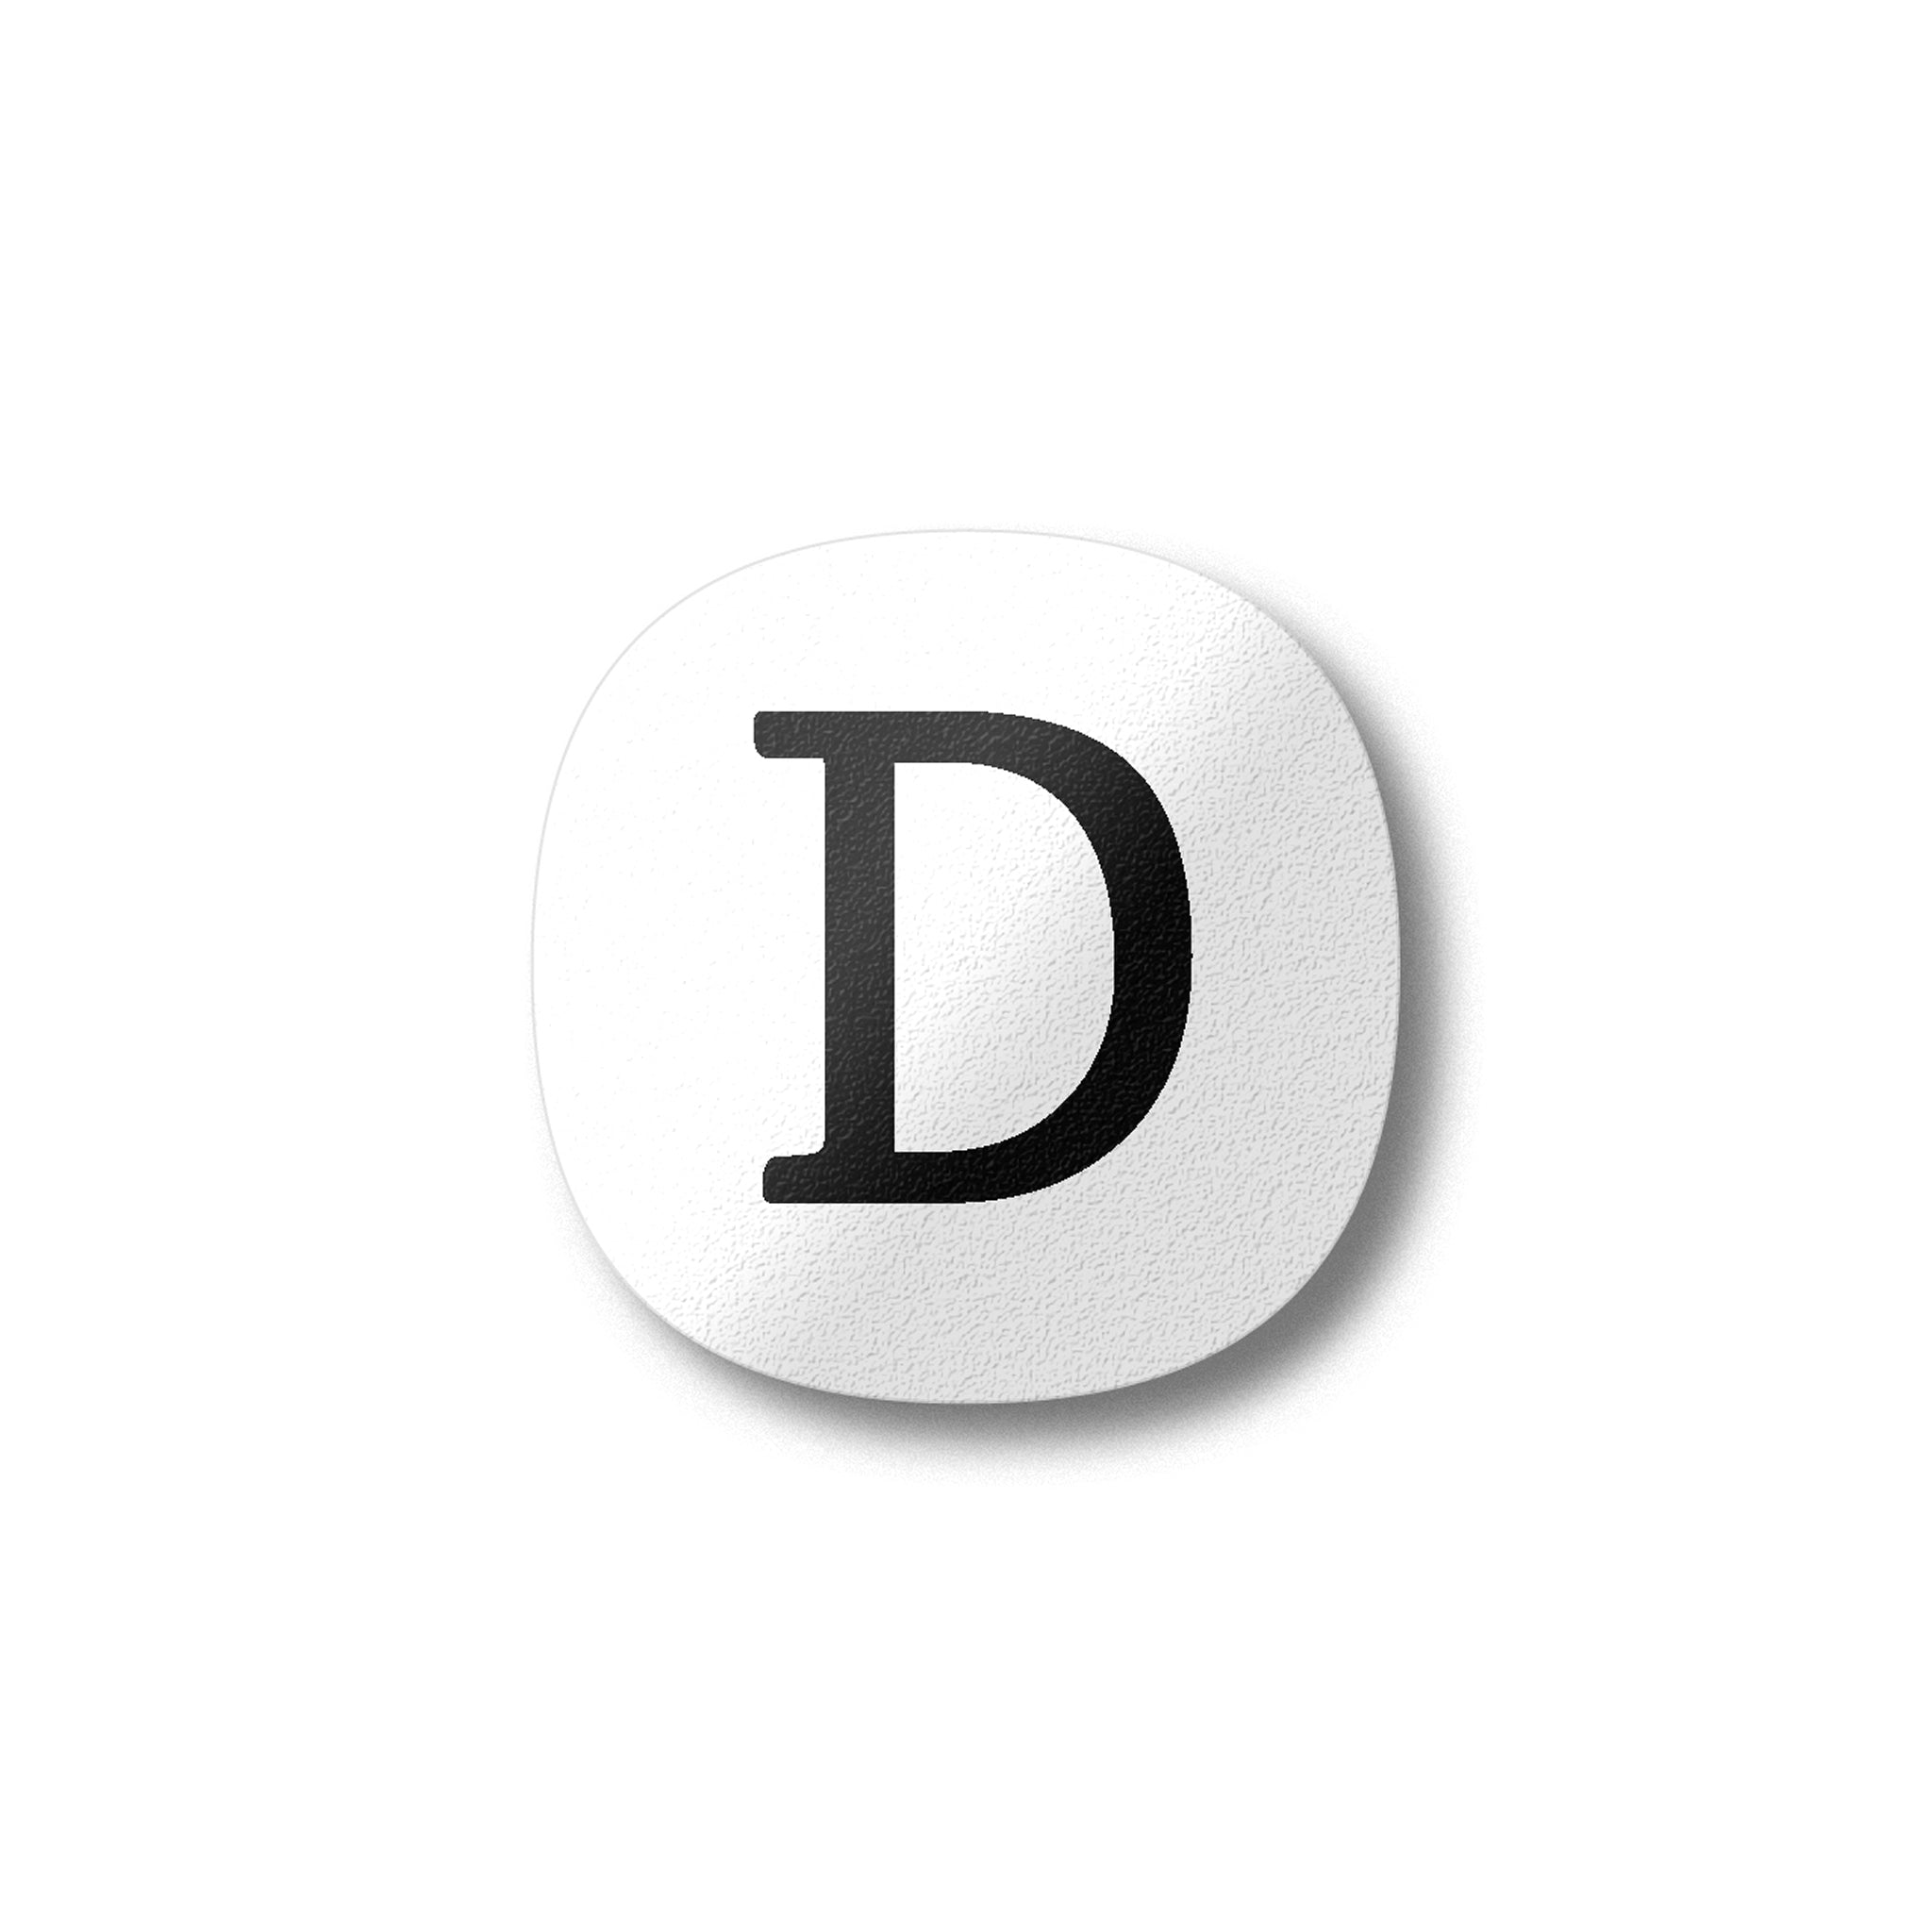 A white magnet with a black letter D plywood fridge magnet by Beyond the Fridge